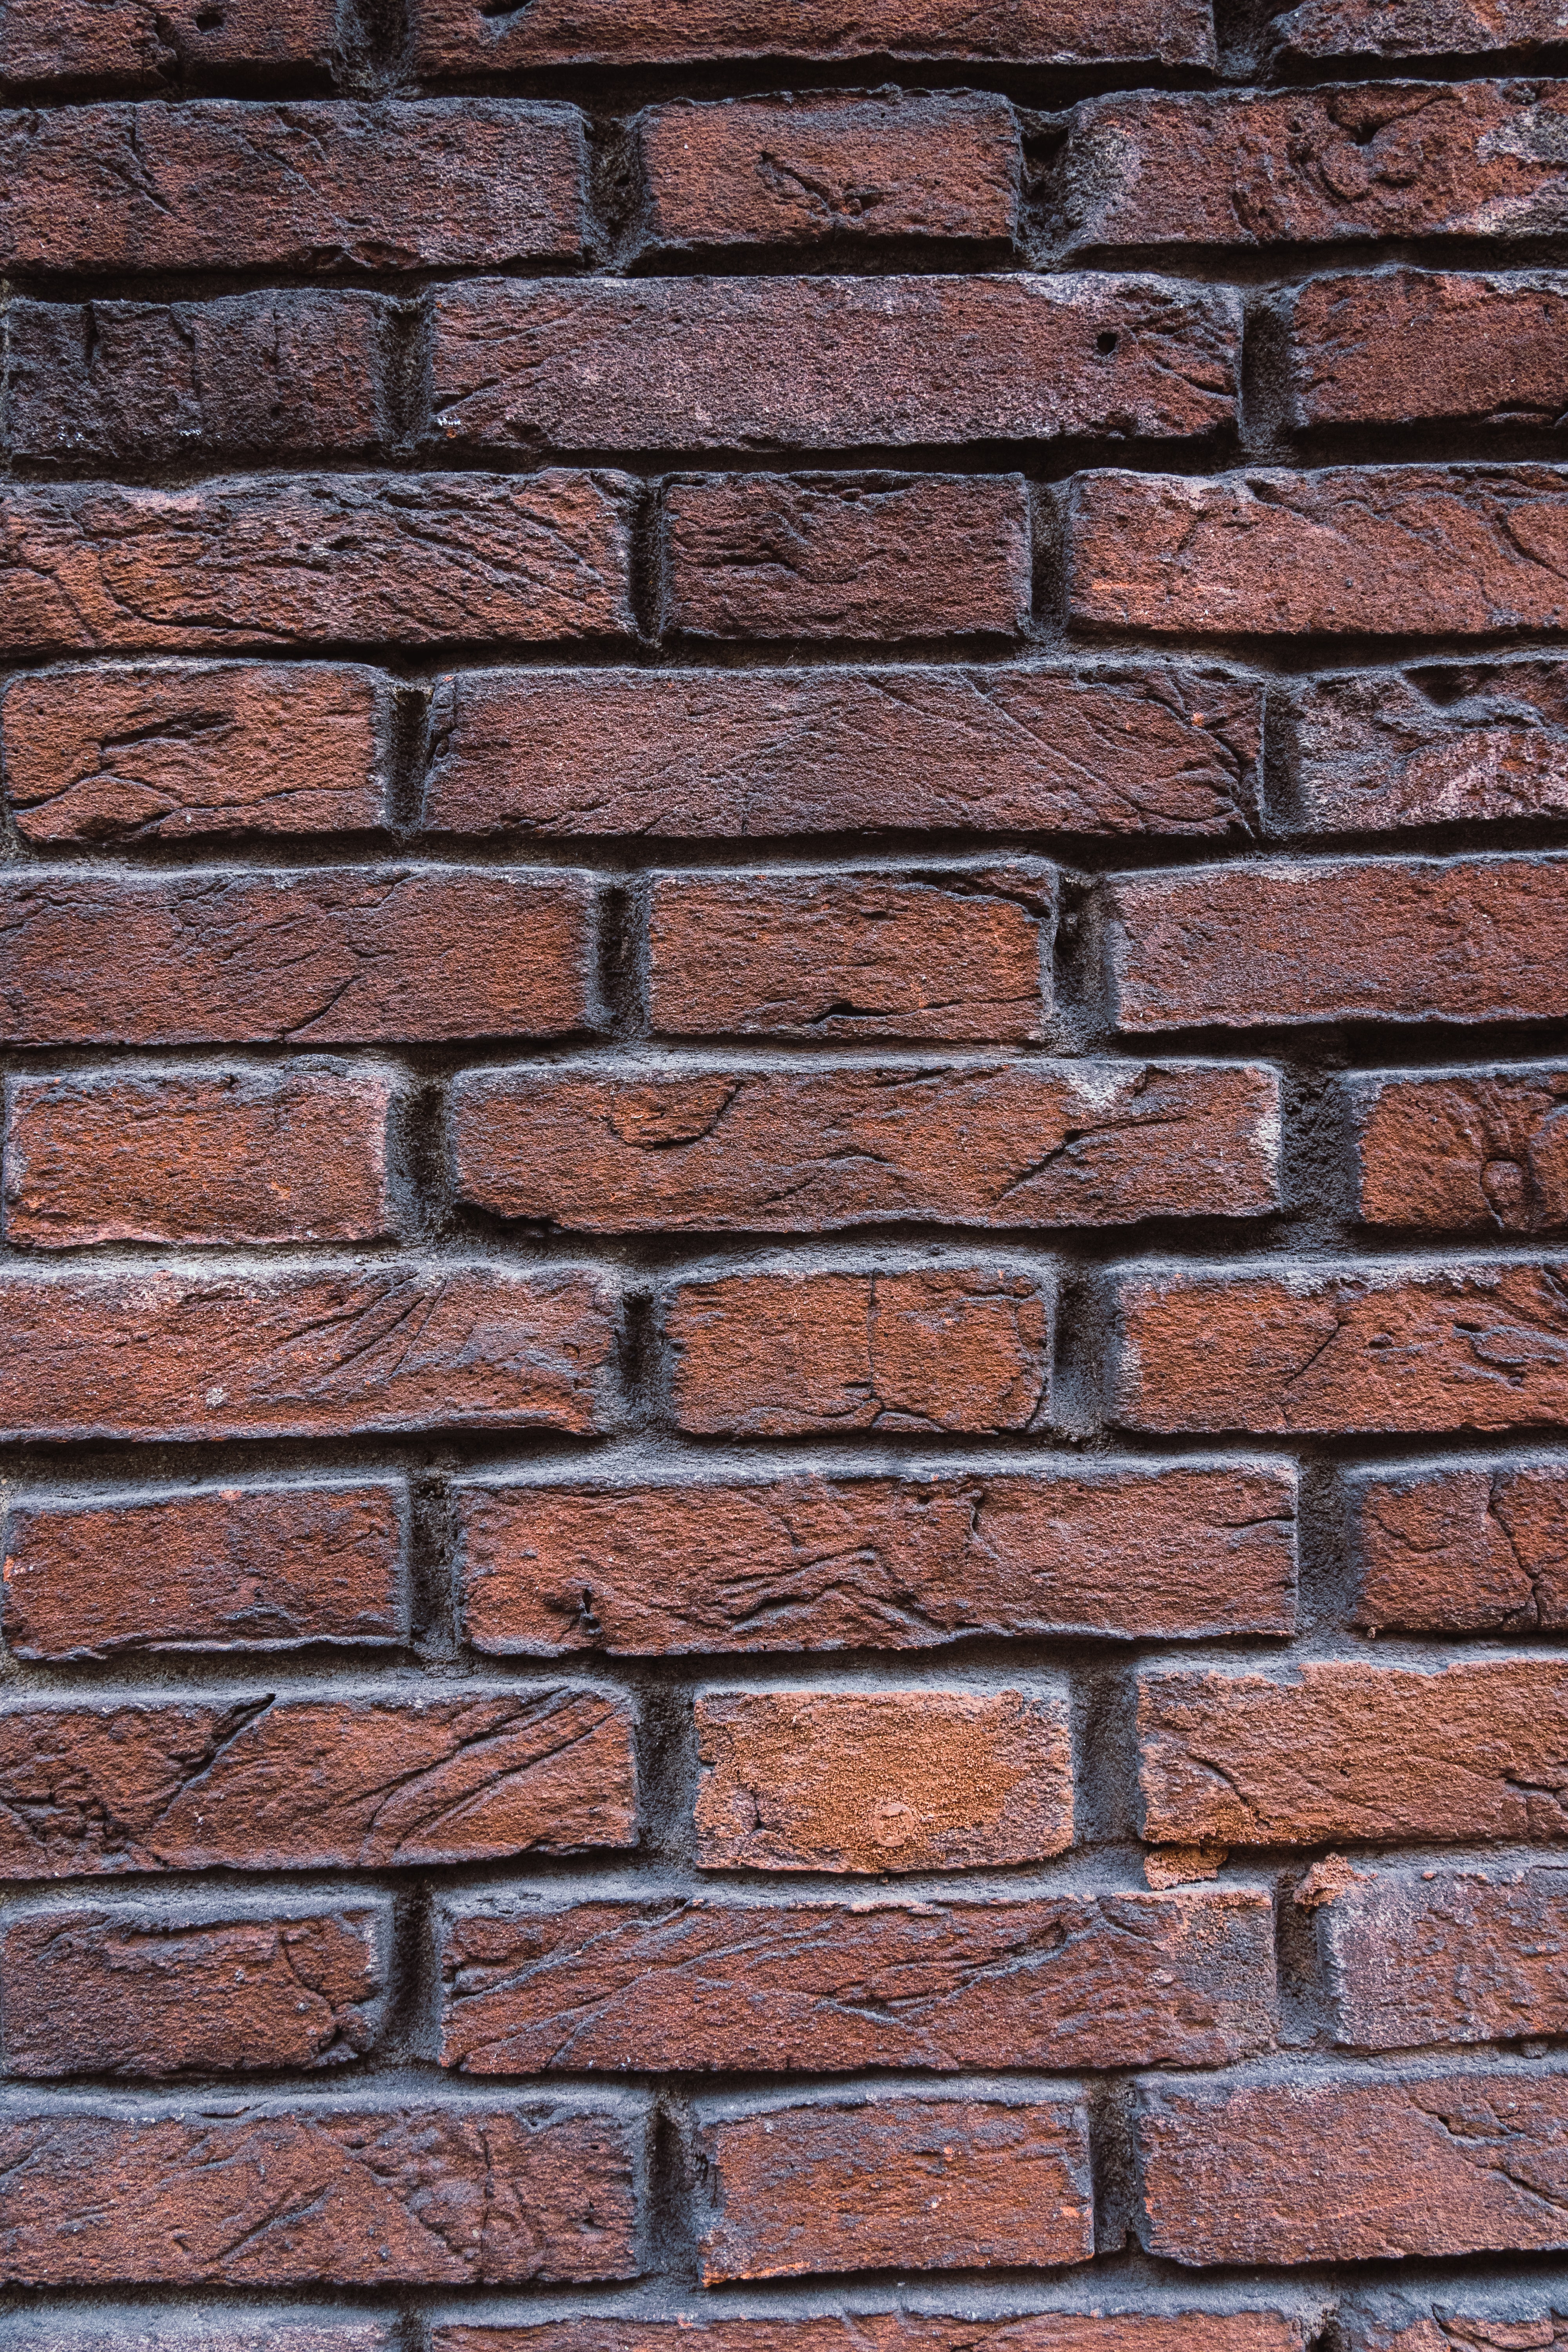 Download "Brick Wall" wallpapers for